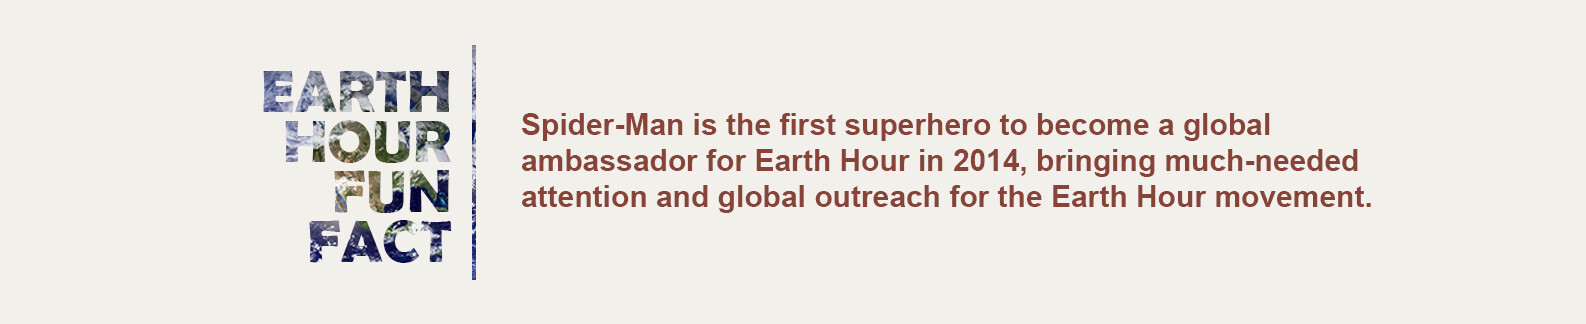 Spider-Man is the first superhero to become a global ambassador for Earth Hour in 2014, bringing much-needed attention and global outreach for the Earth Hour movement.